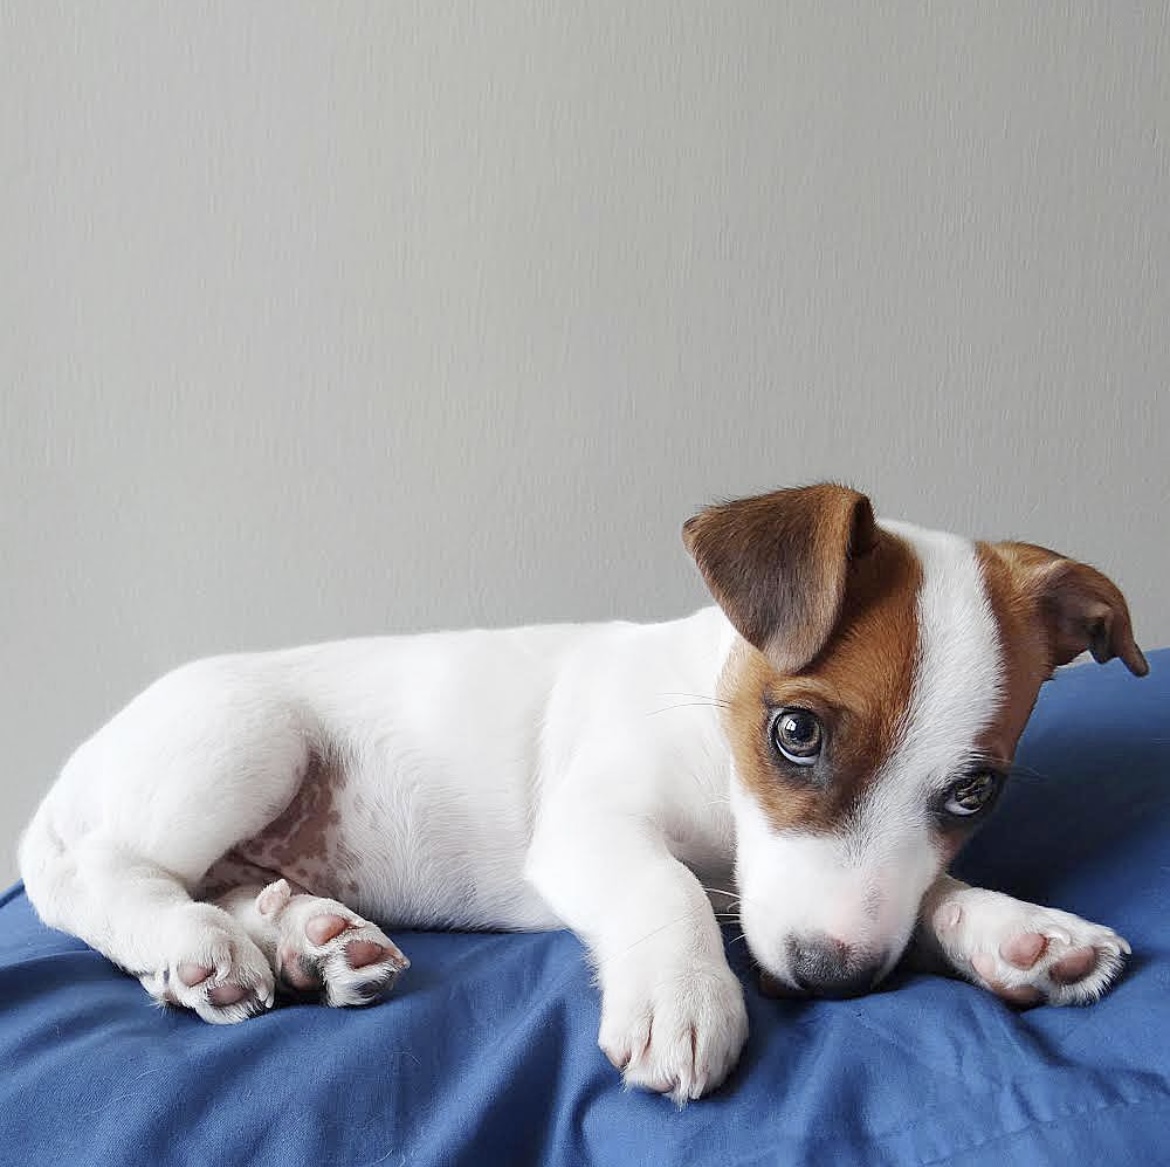 brightening up your day with some baby astro📷

#puppies #doglovers #jackrussellnation #9gag #barked #animalsdoingthings #jrt #jackrusselldog #astro #dogs #dogsofinstagram #dog #dogstagram #jackrussellofinstagram #cute #cuteness #cutenessoverload #doggo #doglovers #doglove